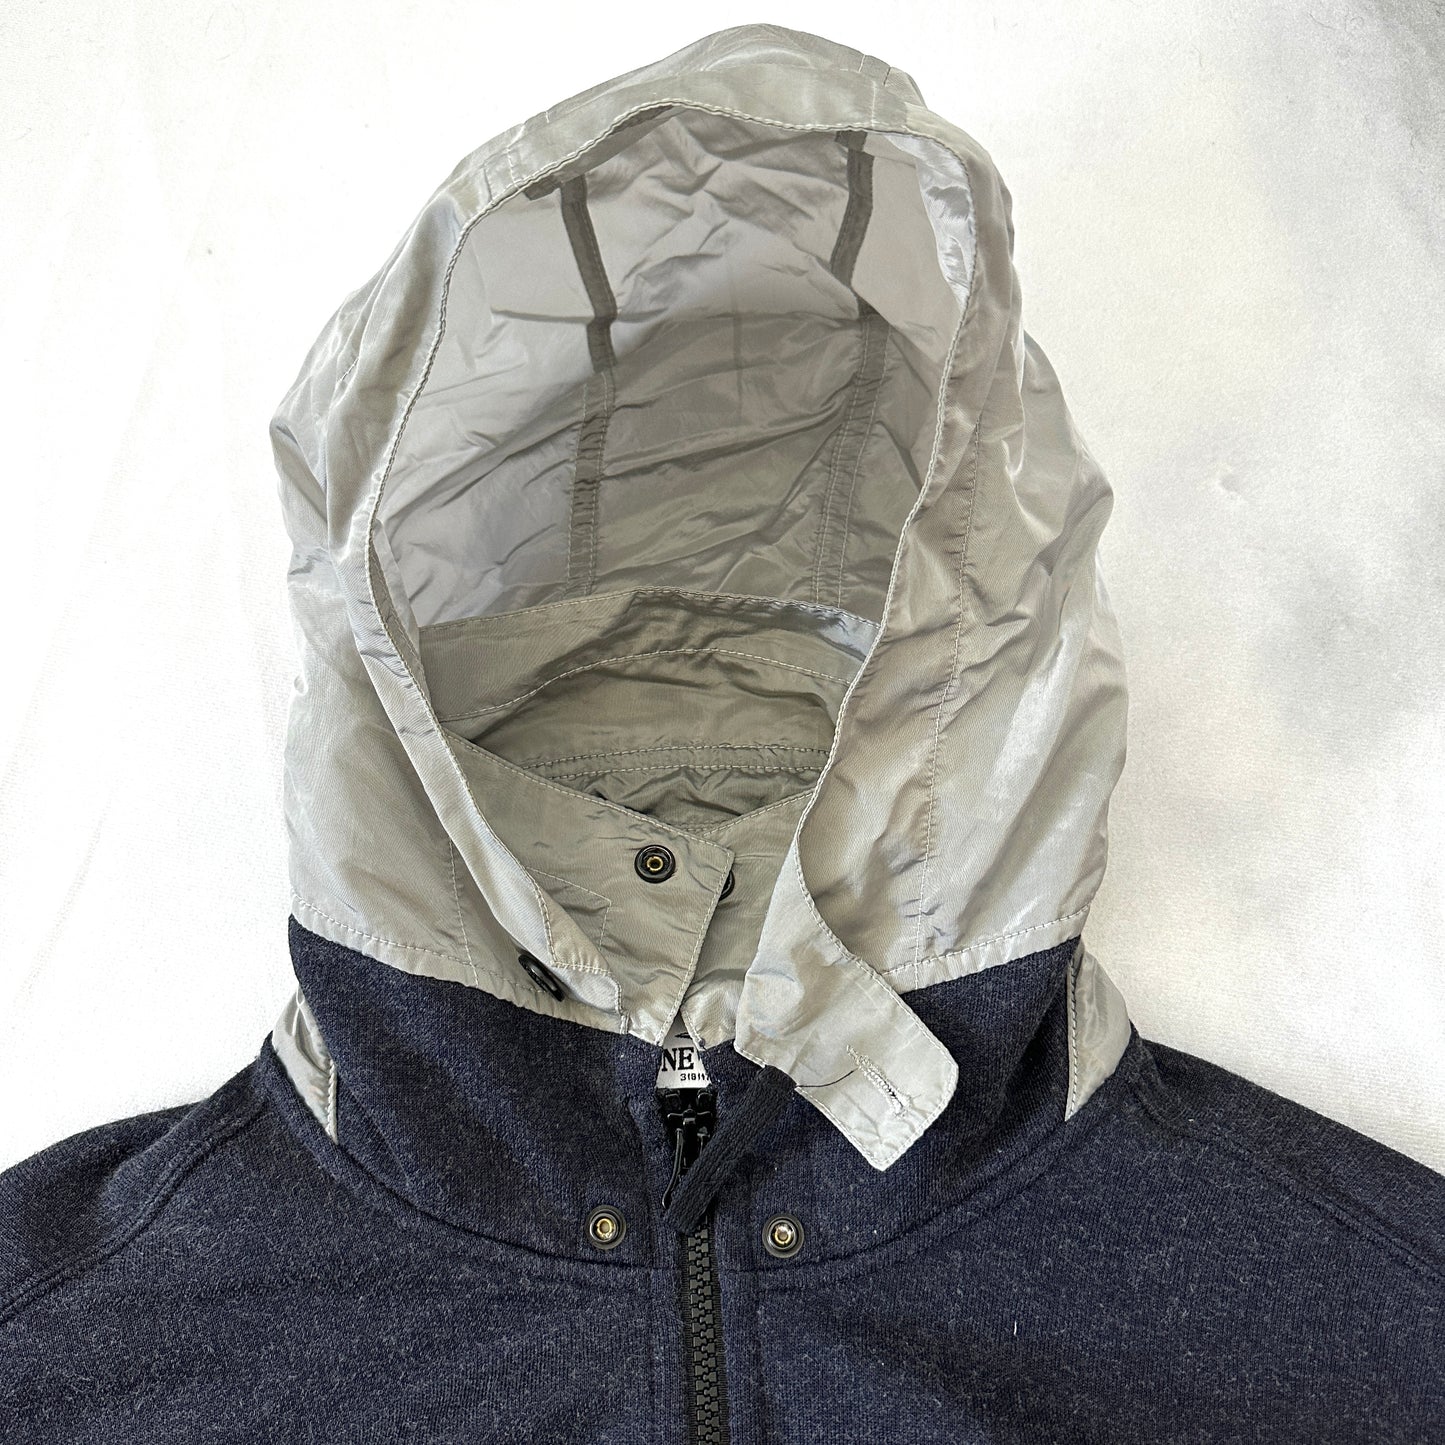 Stone Island 2012 Hooded Zip Jacket - L - Made in Italy